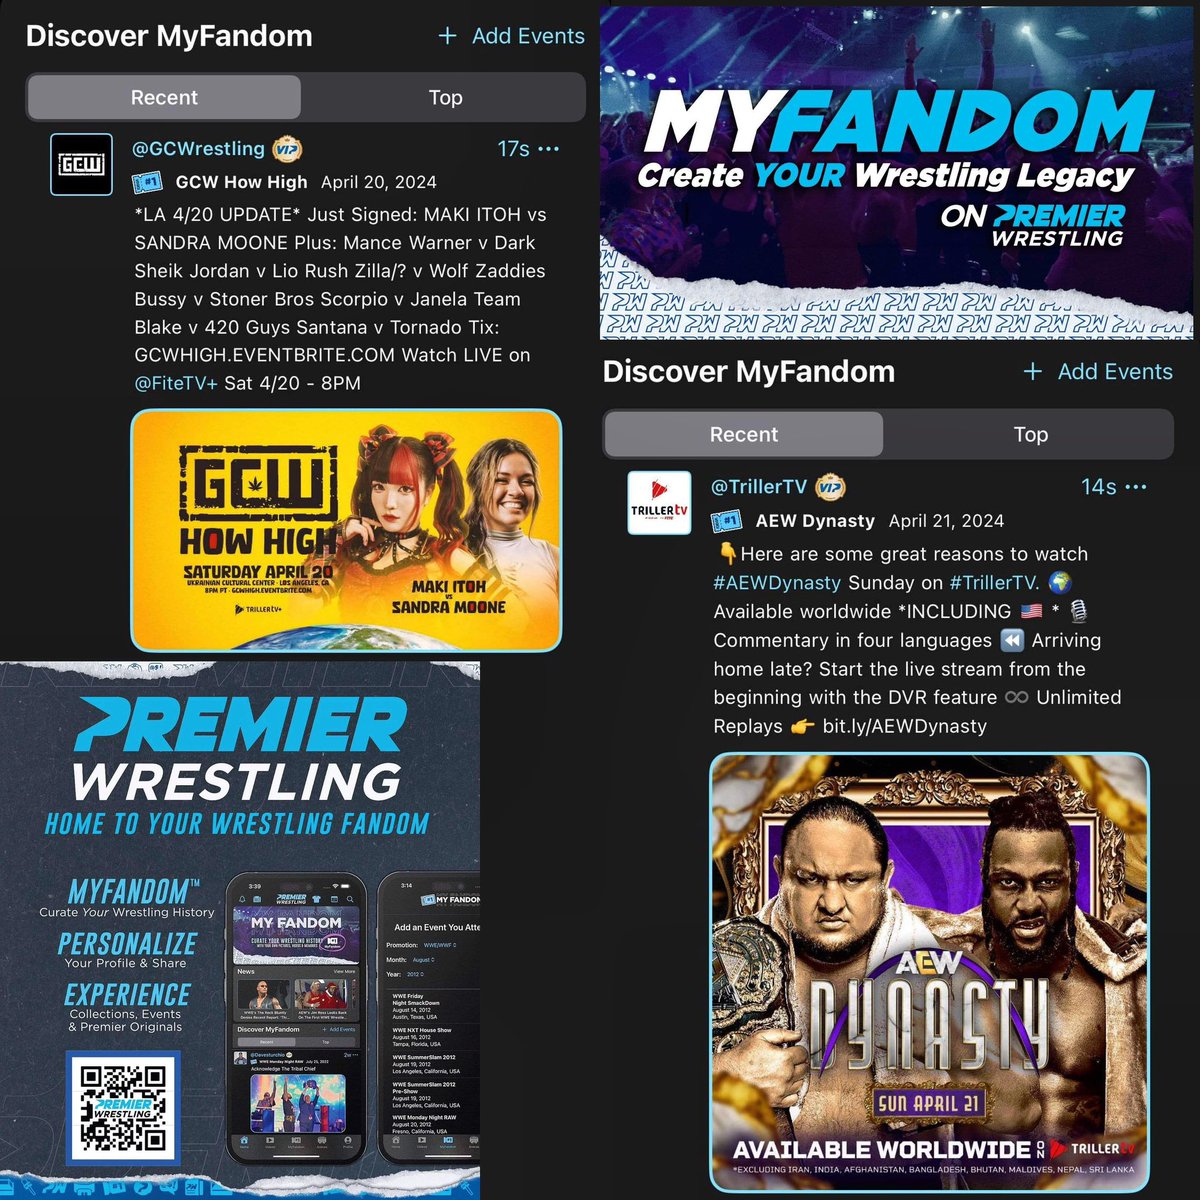 Two HUGE events going down this weekend! Are you headed to California for @GCWrestling_ ?Going to St. Louis for @aew ! Head on over to #MyFandom to post your pictures and videos from those events on the Premier Wrestling App!! We want to see both events all over our #MyFandom